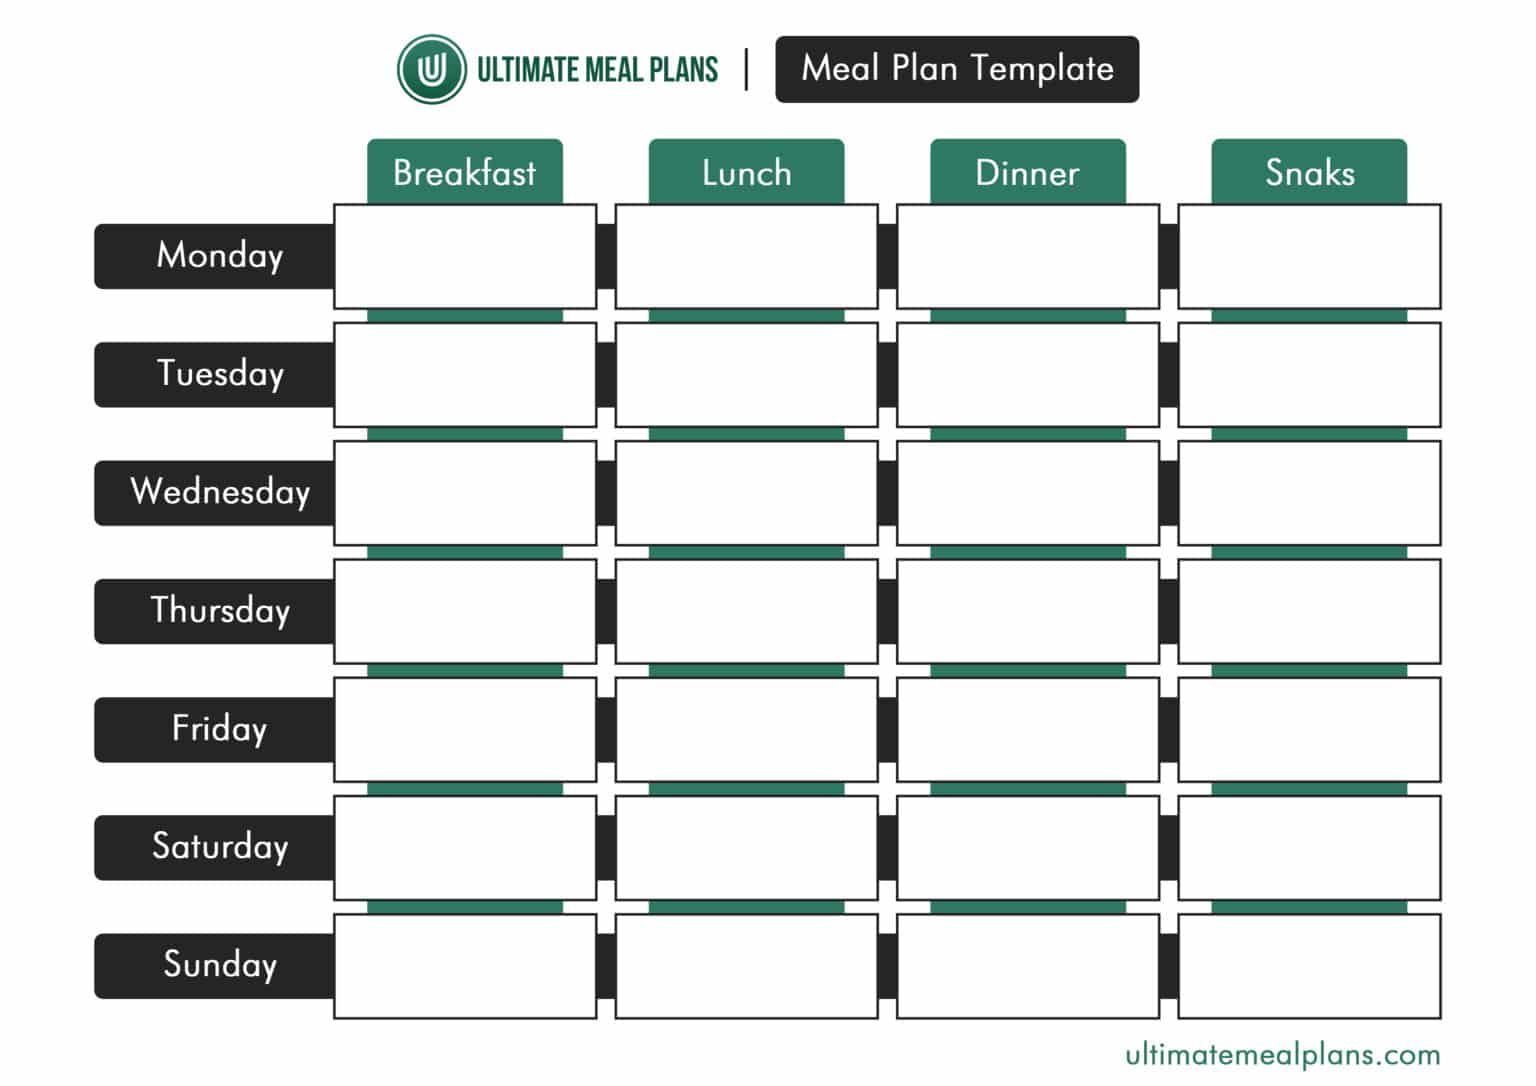 4 Free Templates for Meal Planning | Ultimate Meal Plans